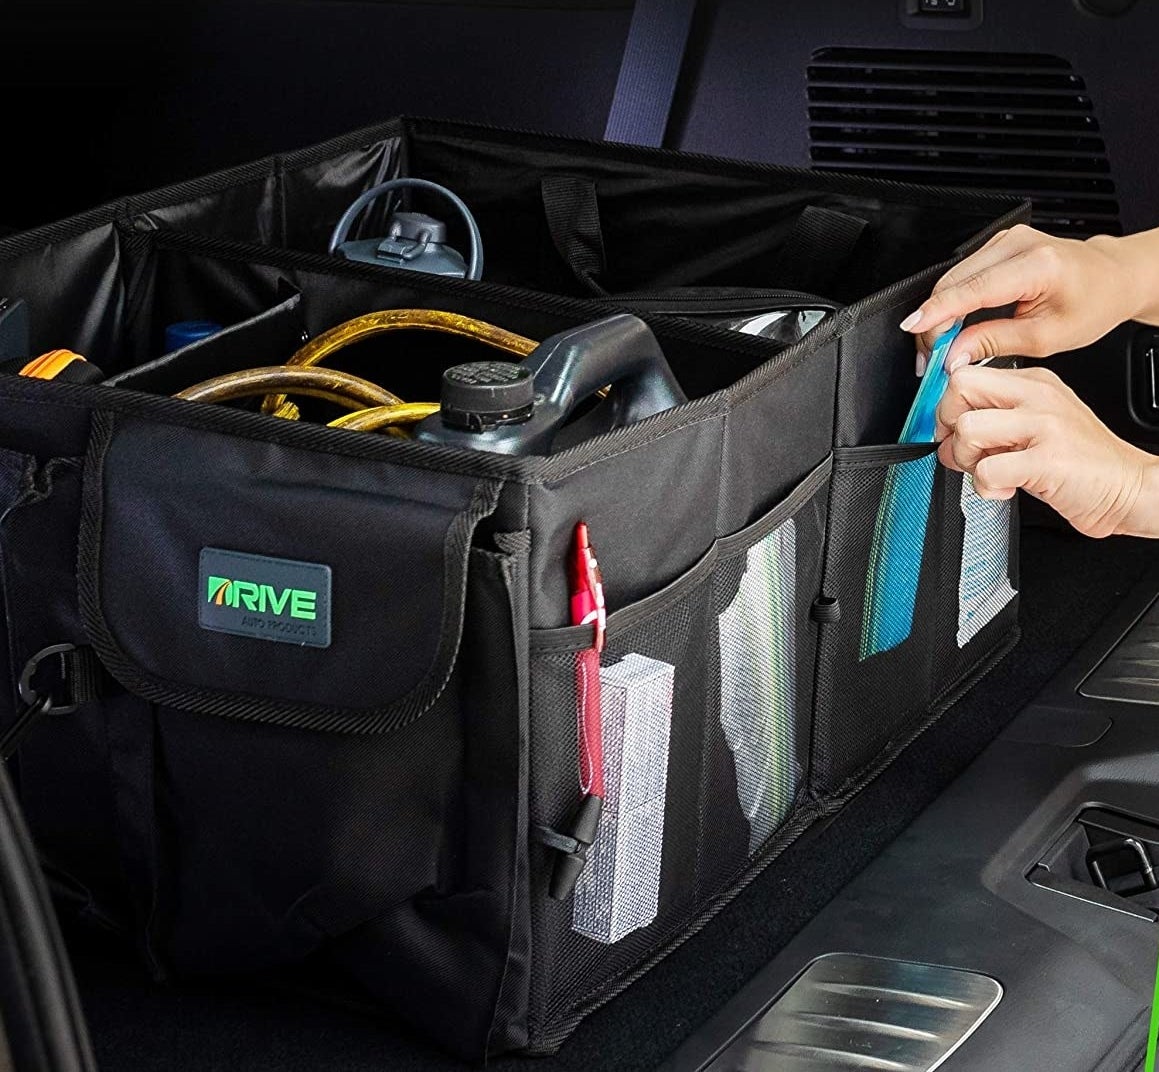 the organizer in a trunk filled with things and someone putting something in one of the pockets